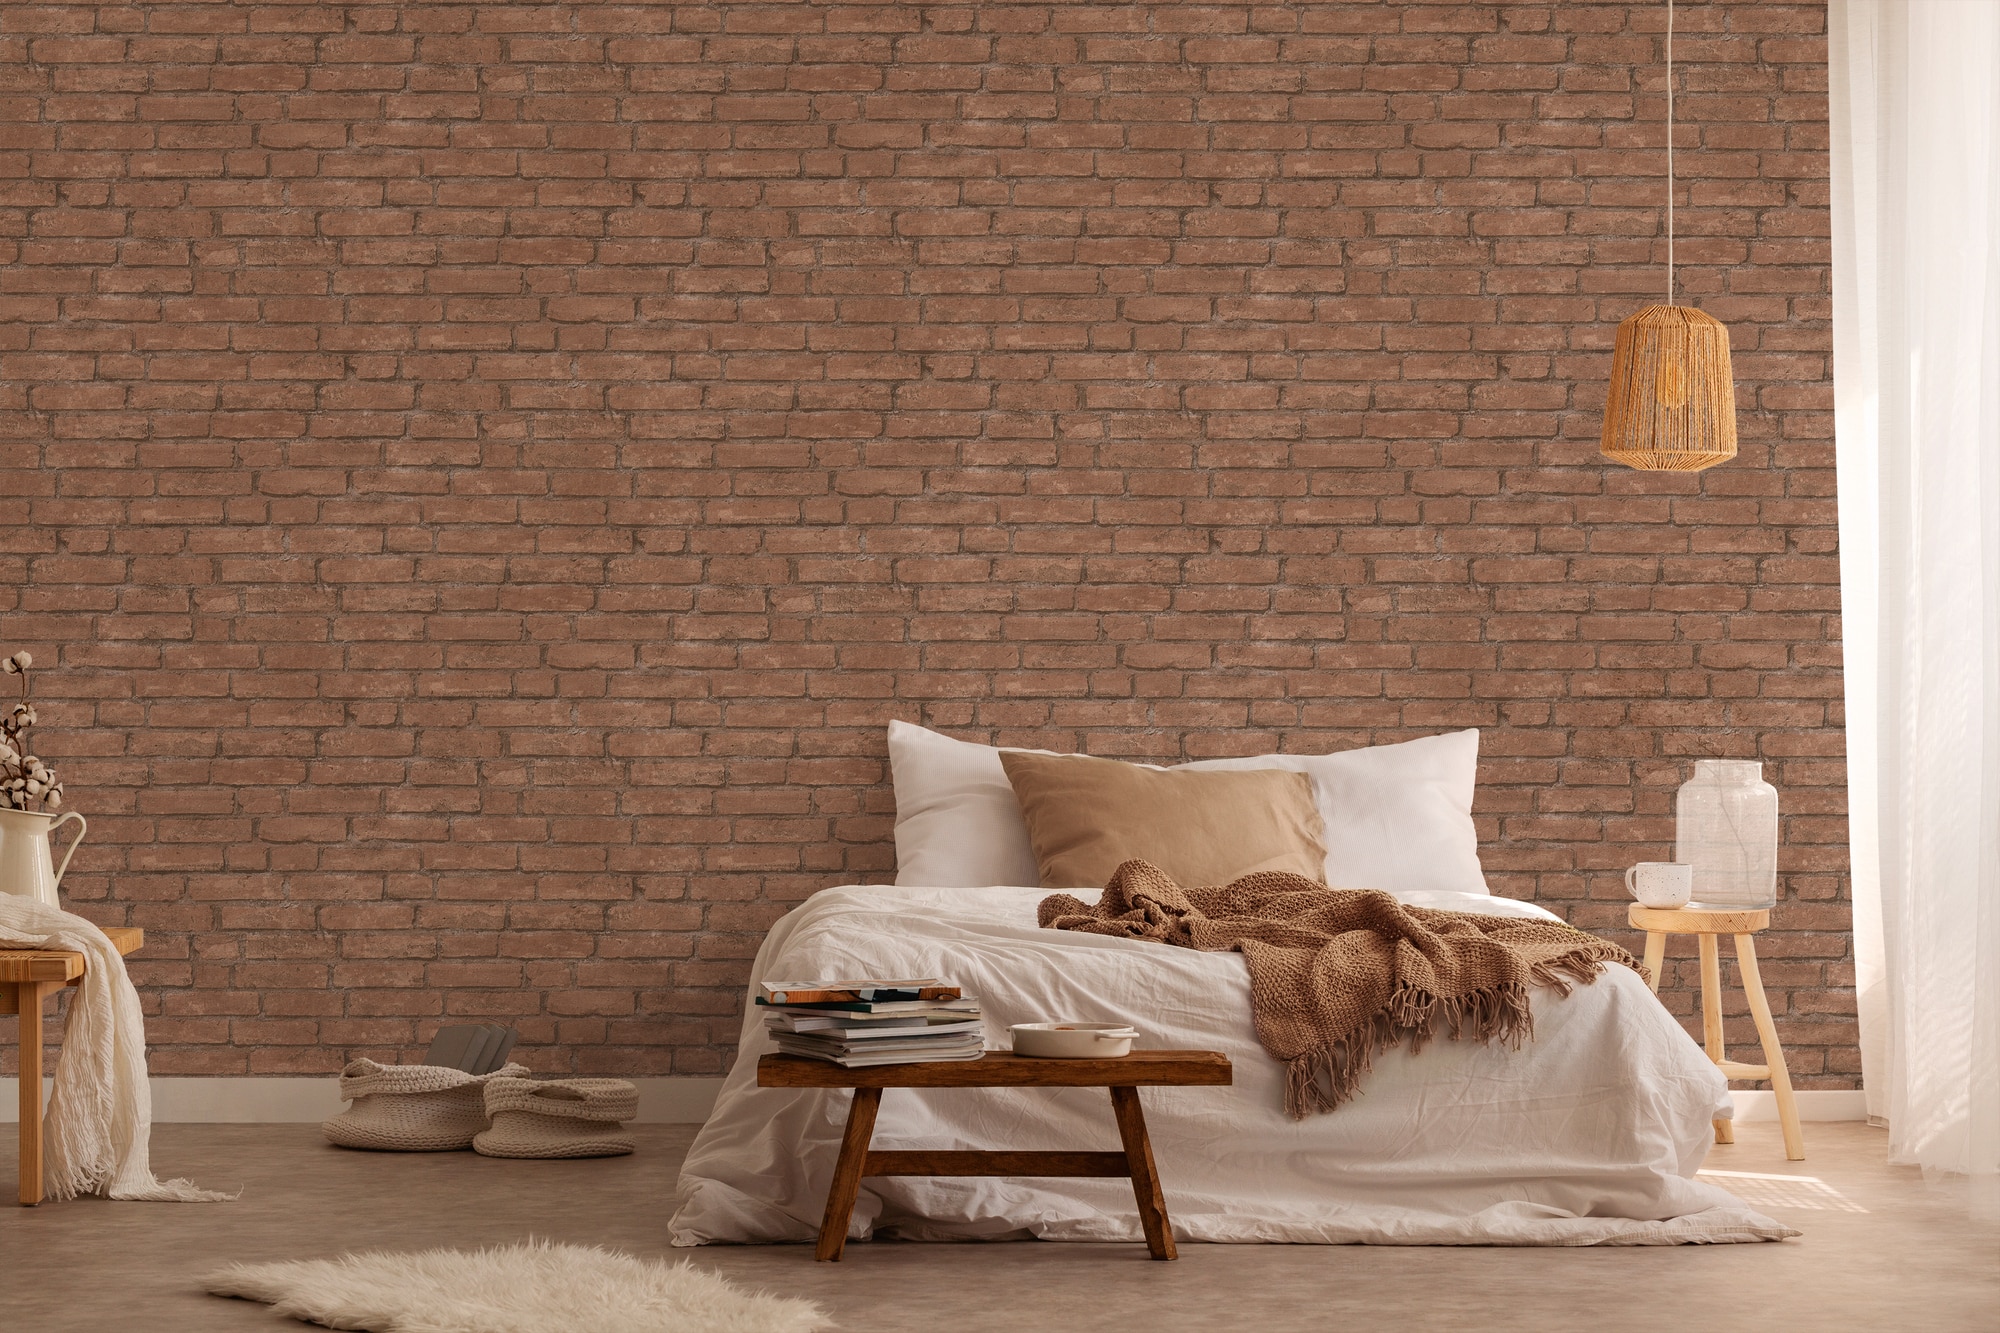 Why Pick a Personalized Industrial Brick Wallpaper?